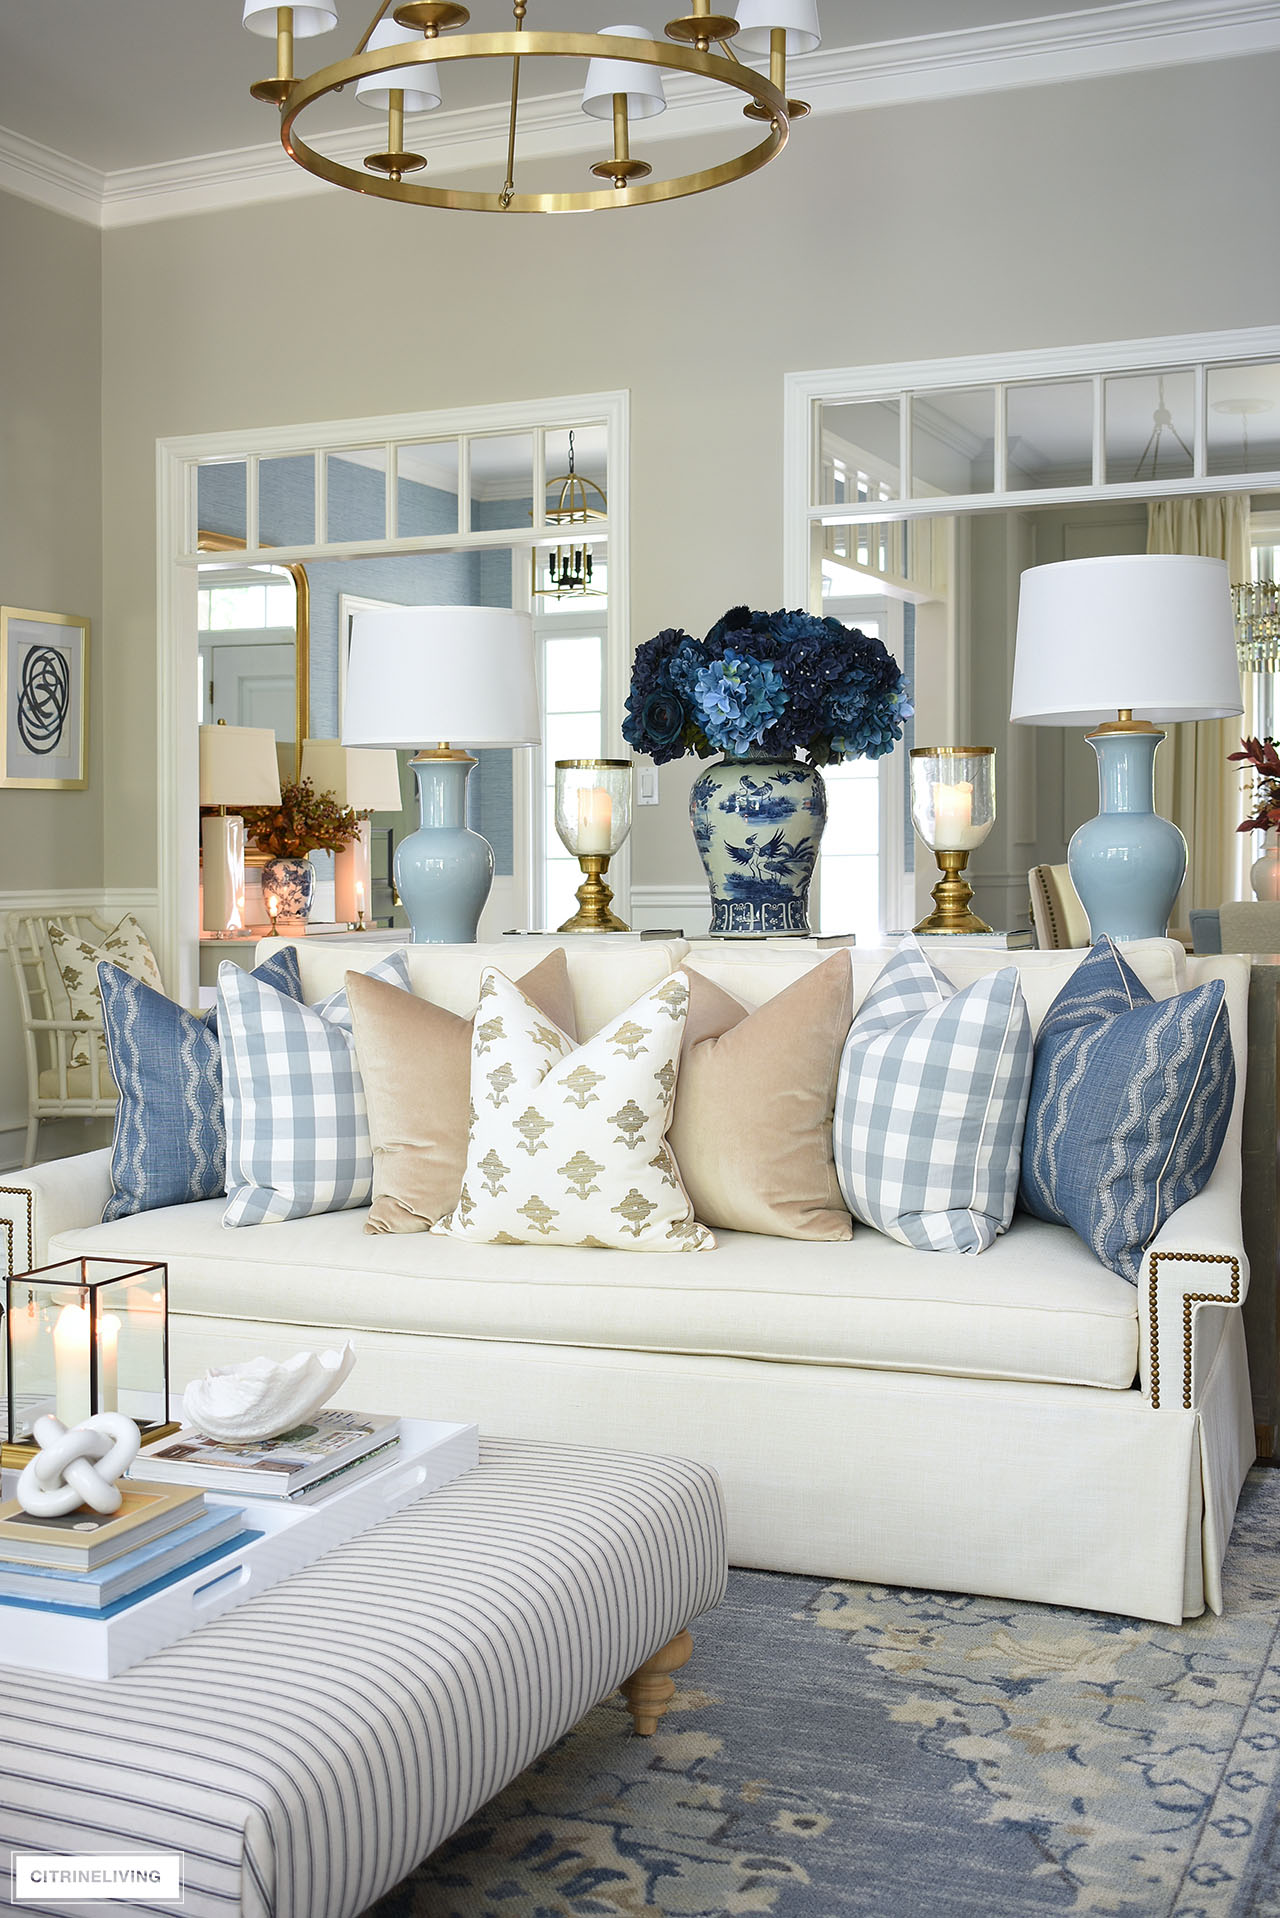 Ivory skirted sofa styled with luxe pillows in blue, tan and ivory